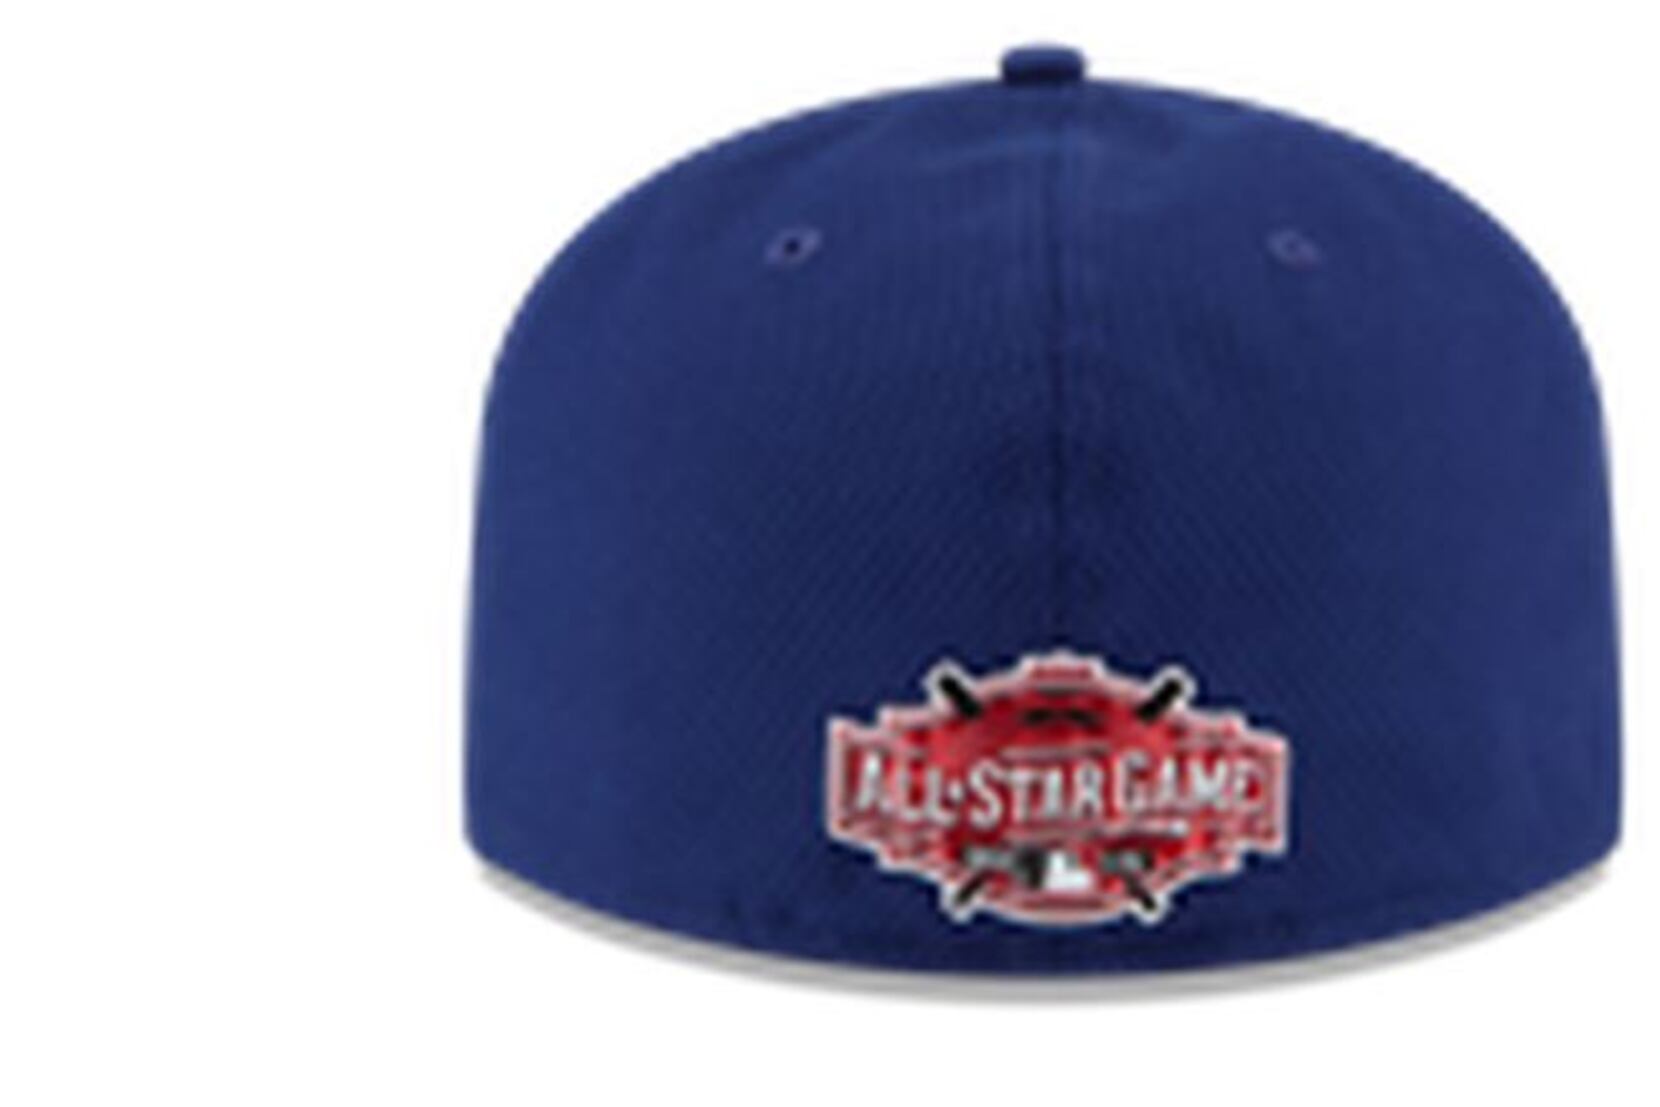 2015 All-Star cap to pay homage to history of Cincinnati baseball